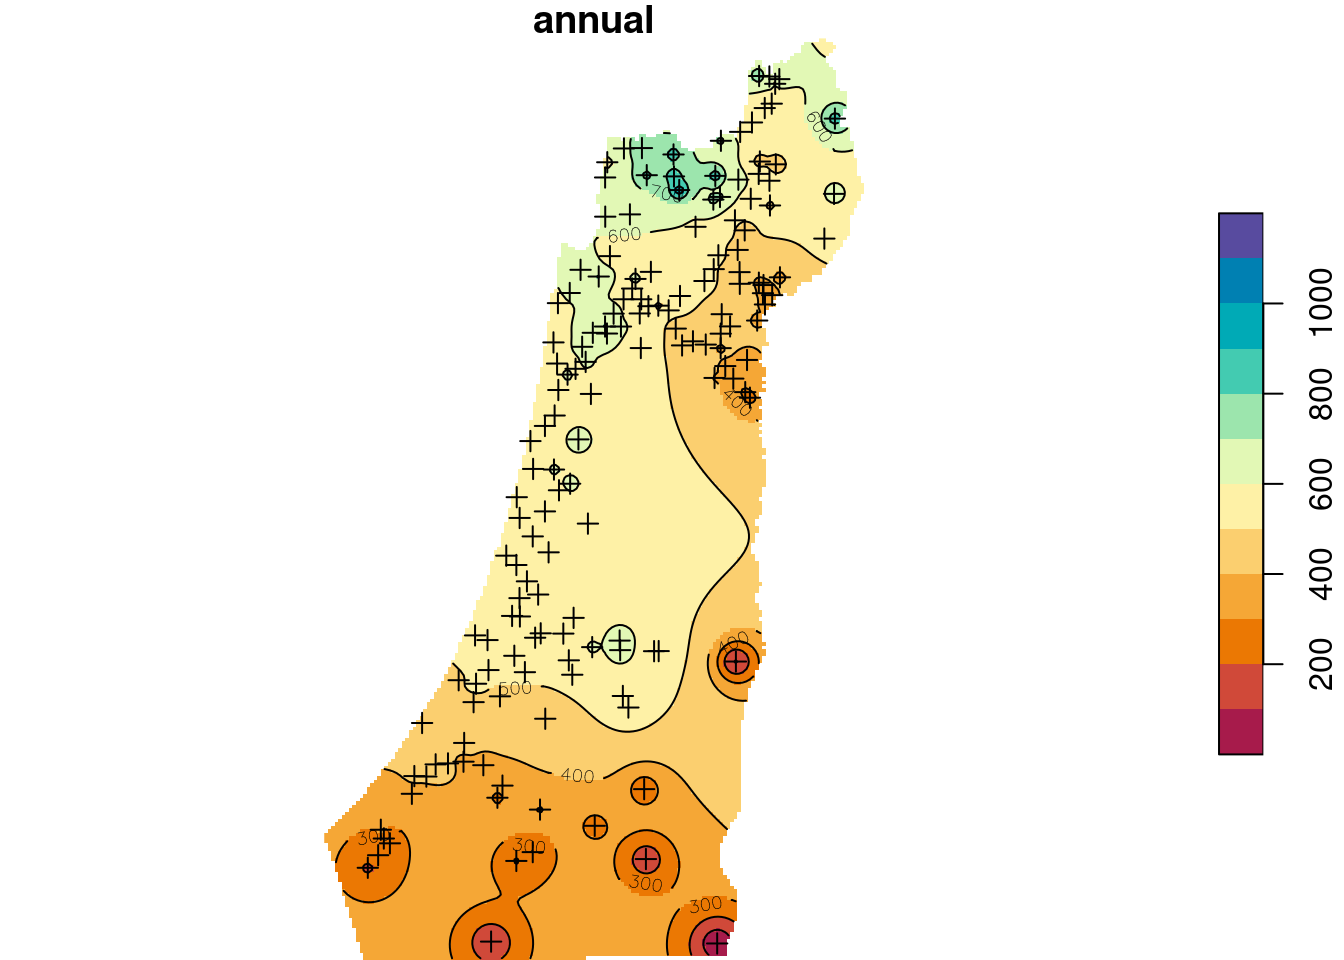 Predicted annual rainfall using Inverse Distance Weighted (IDW) interpolation